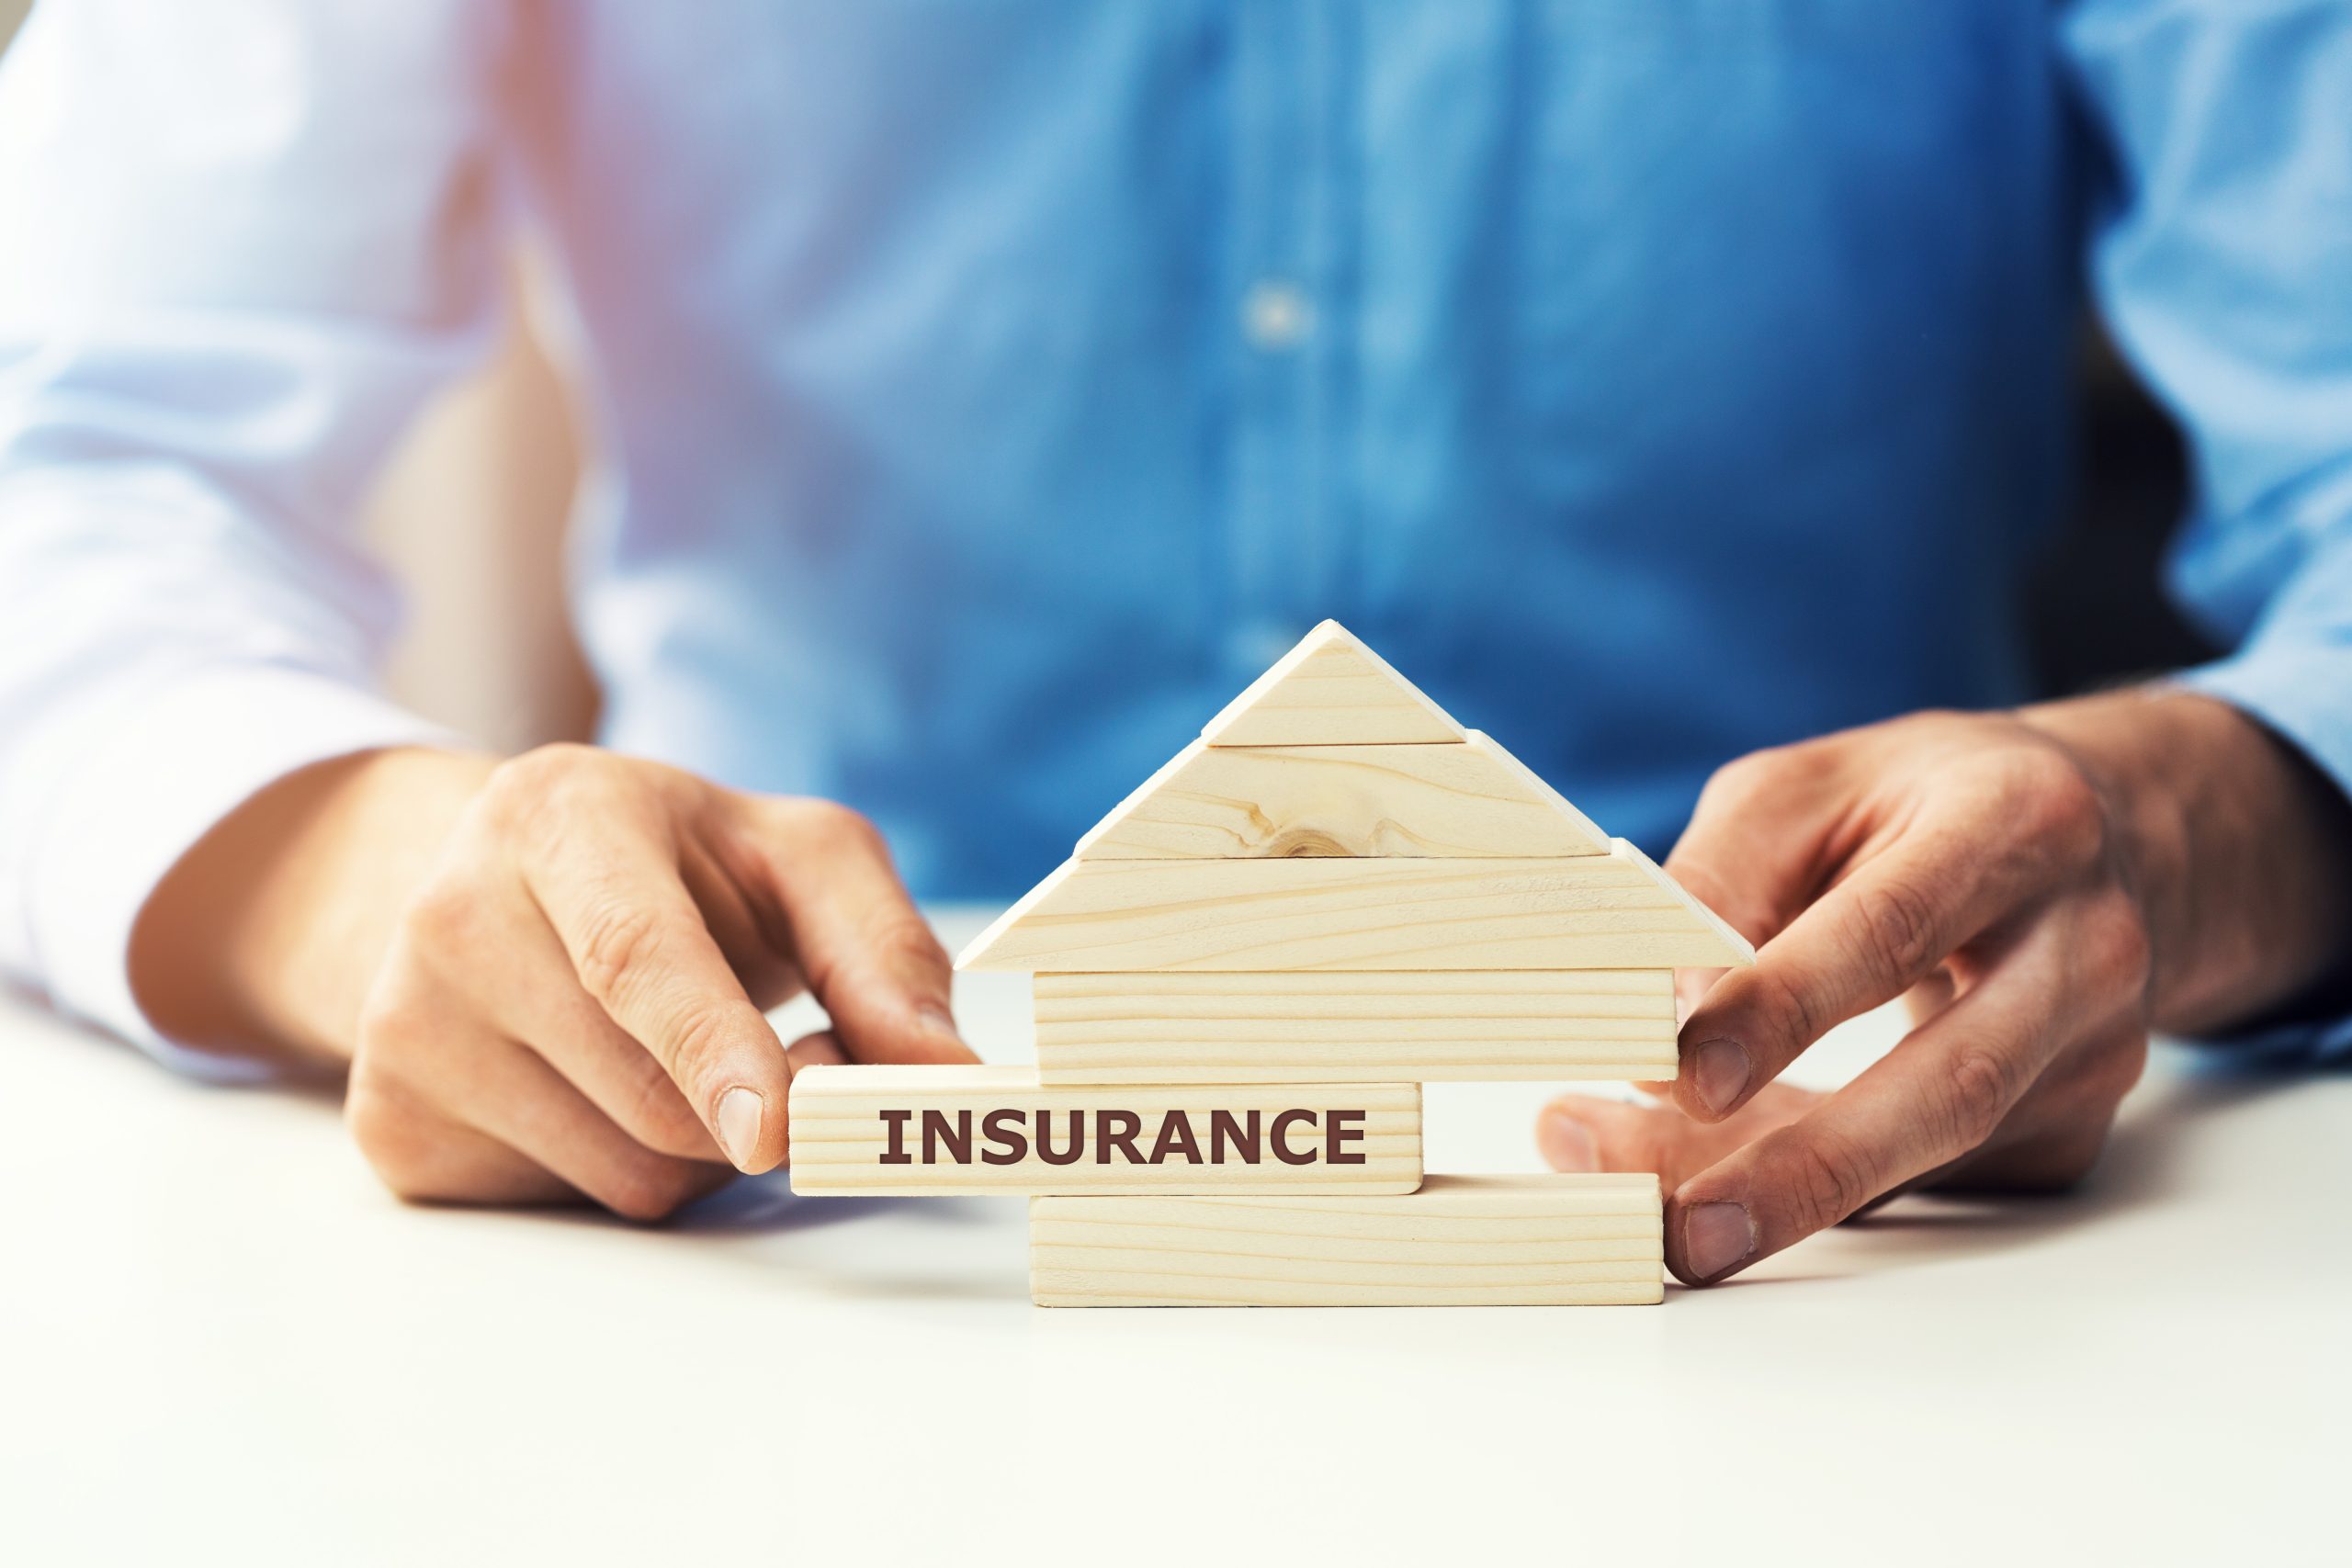 Property and Casualty Insurance: An often-overlooked part of one’s financial plan